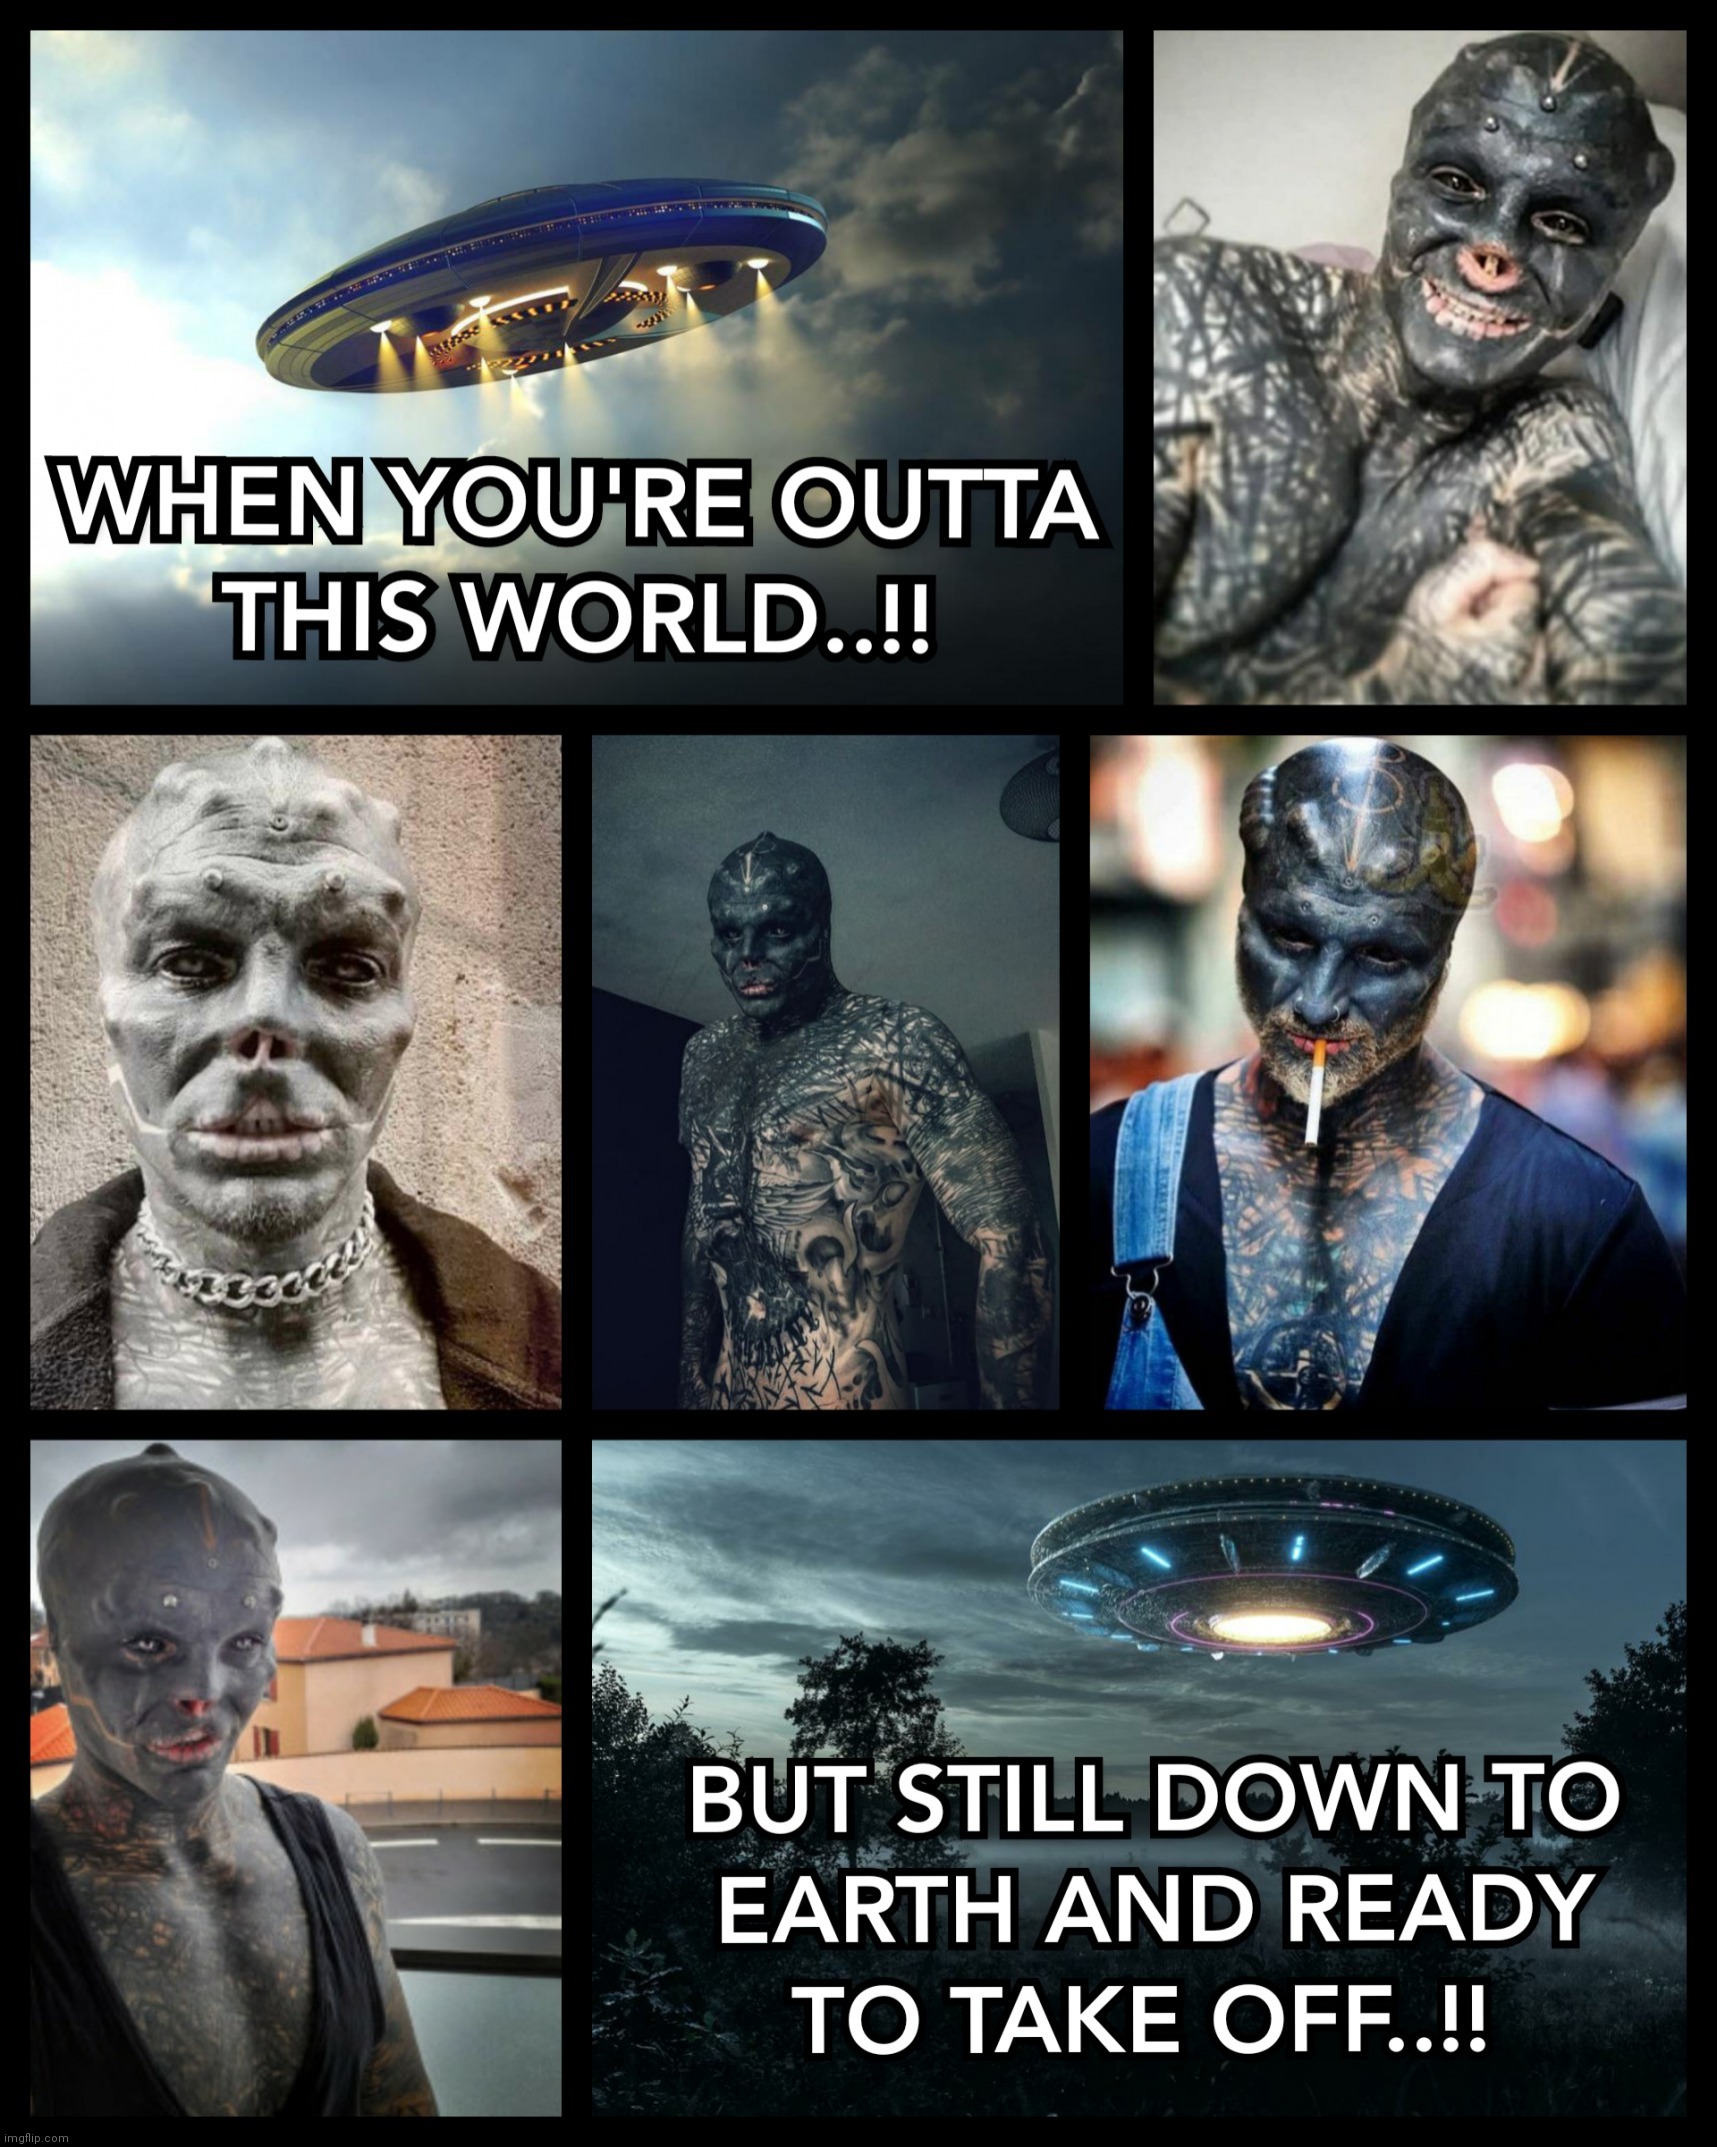 WHEN YOU'RE OUTTA THIS WORLD AND READY TO TAKE OFF..!! | image tagged in aliens,spaceship,ufos,memes,earth,satanic woody | made w/ Imgflip meme maker